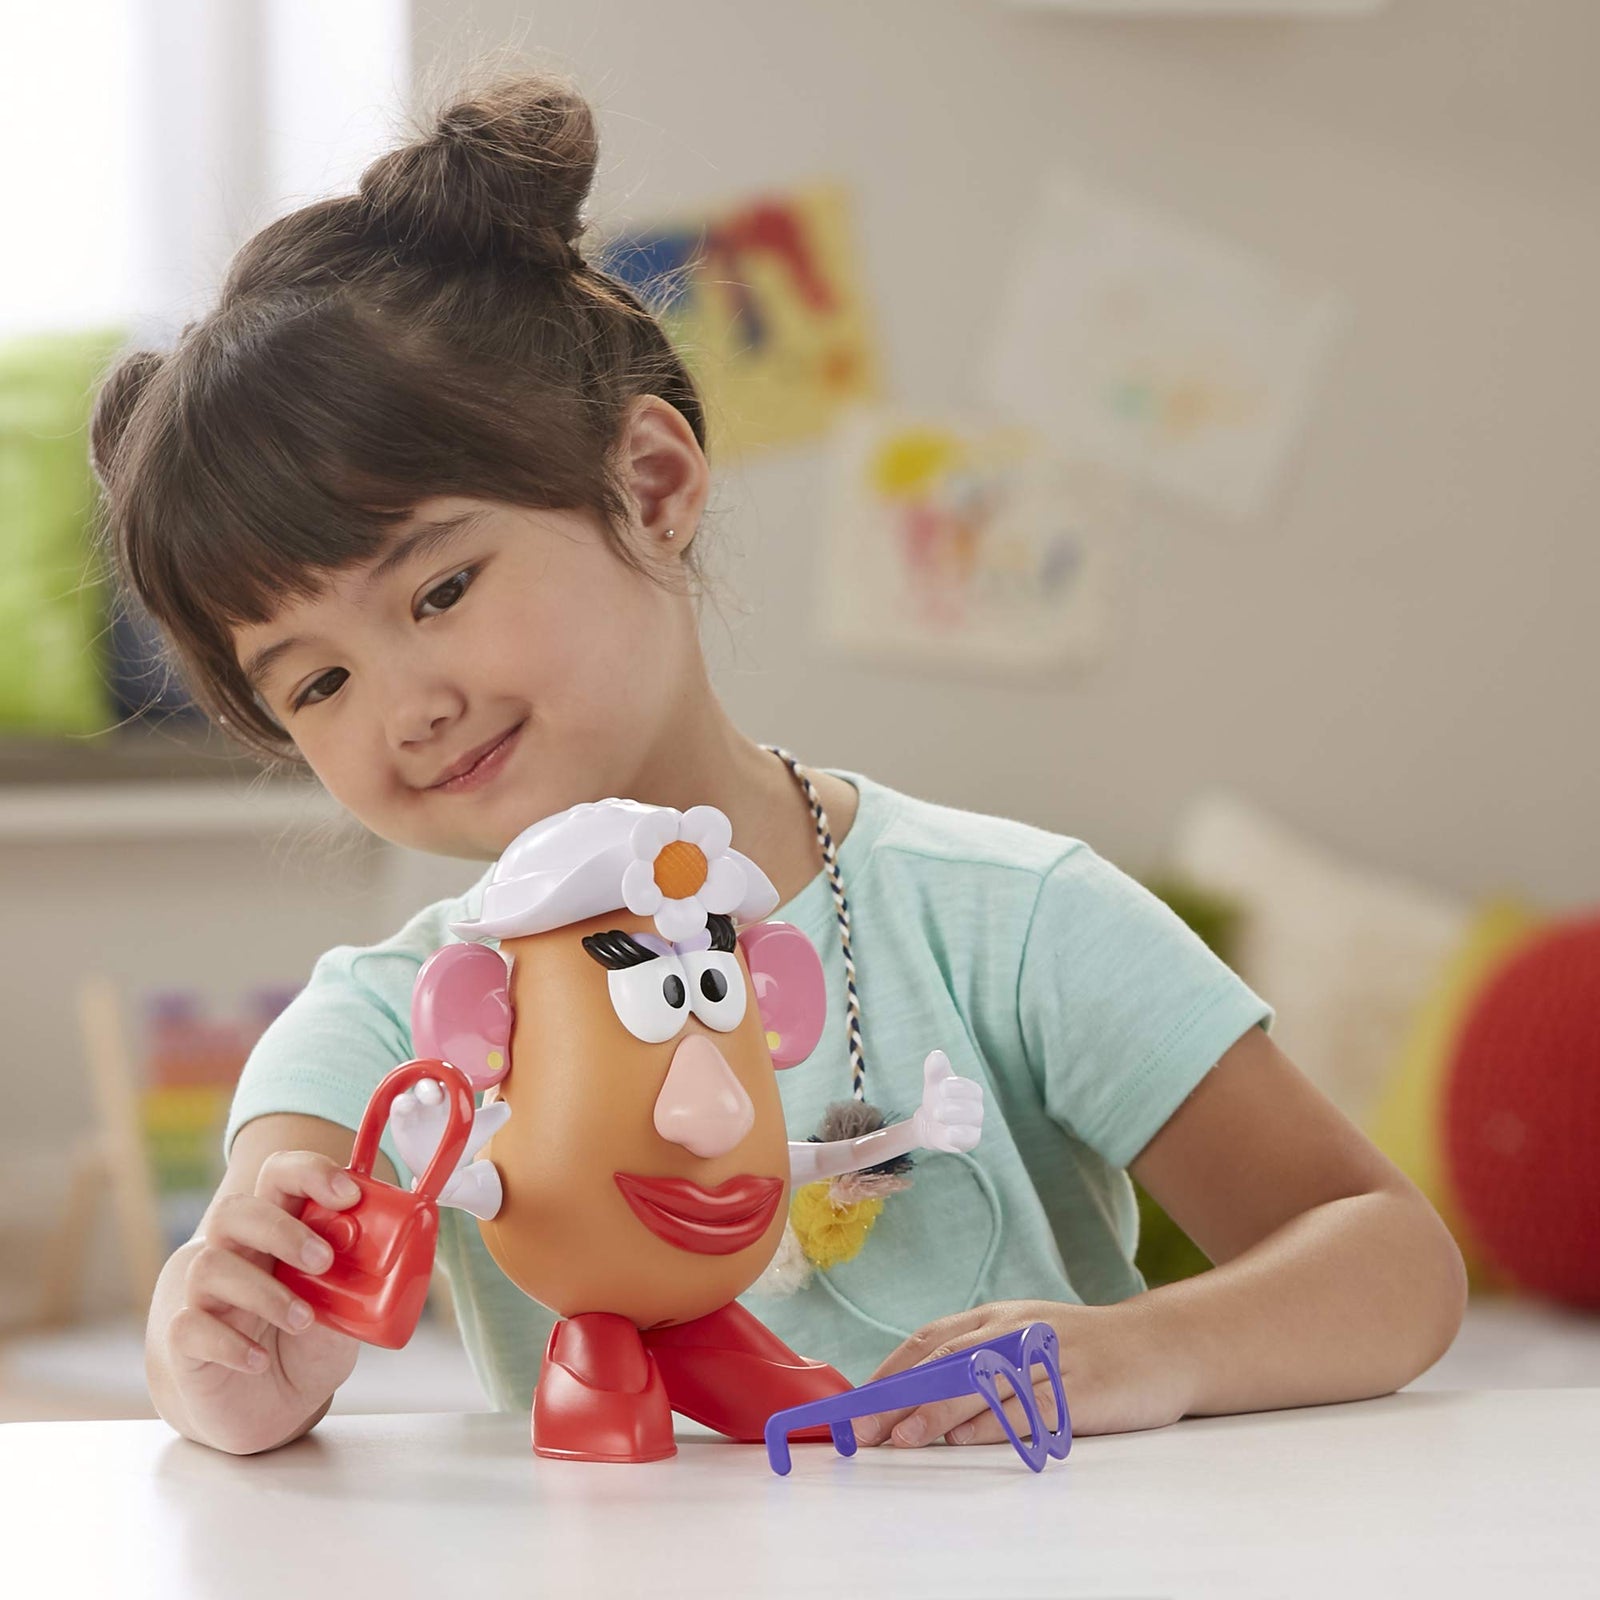 Mrs. Potato Head Disney/Pixar Toy Story 4 Classic Mrs. Figure Toy For Kids Ages 2 & Up